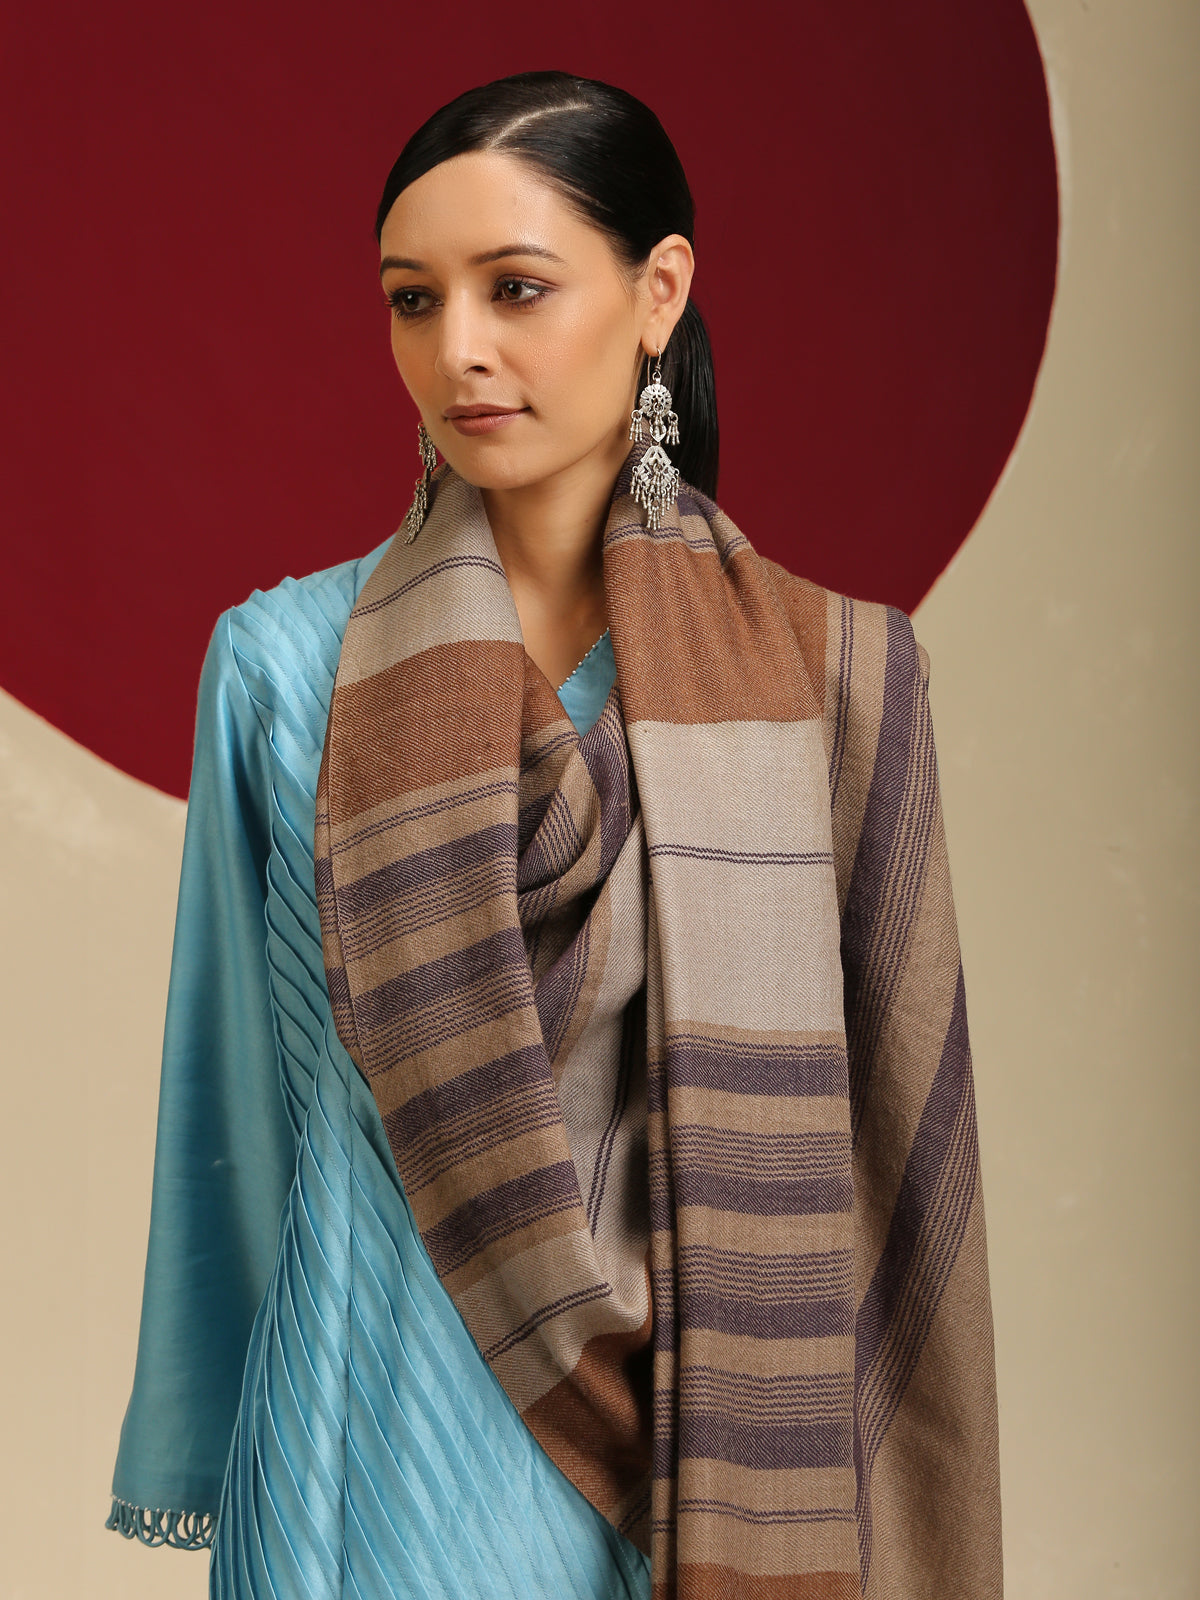 Model is wearing Pashmina check stole in brown and purple stripes.